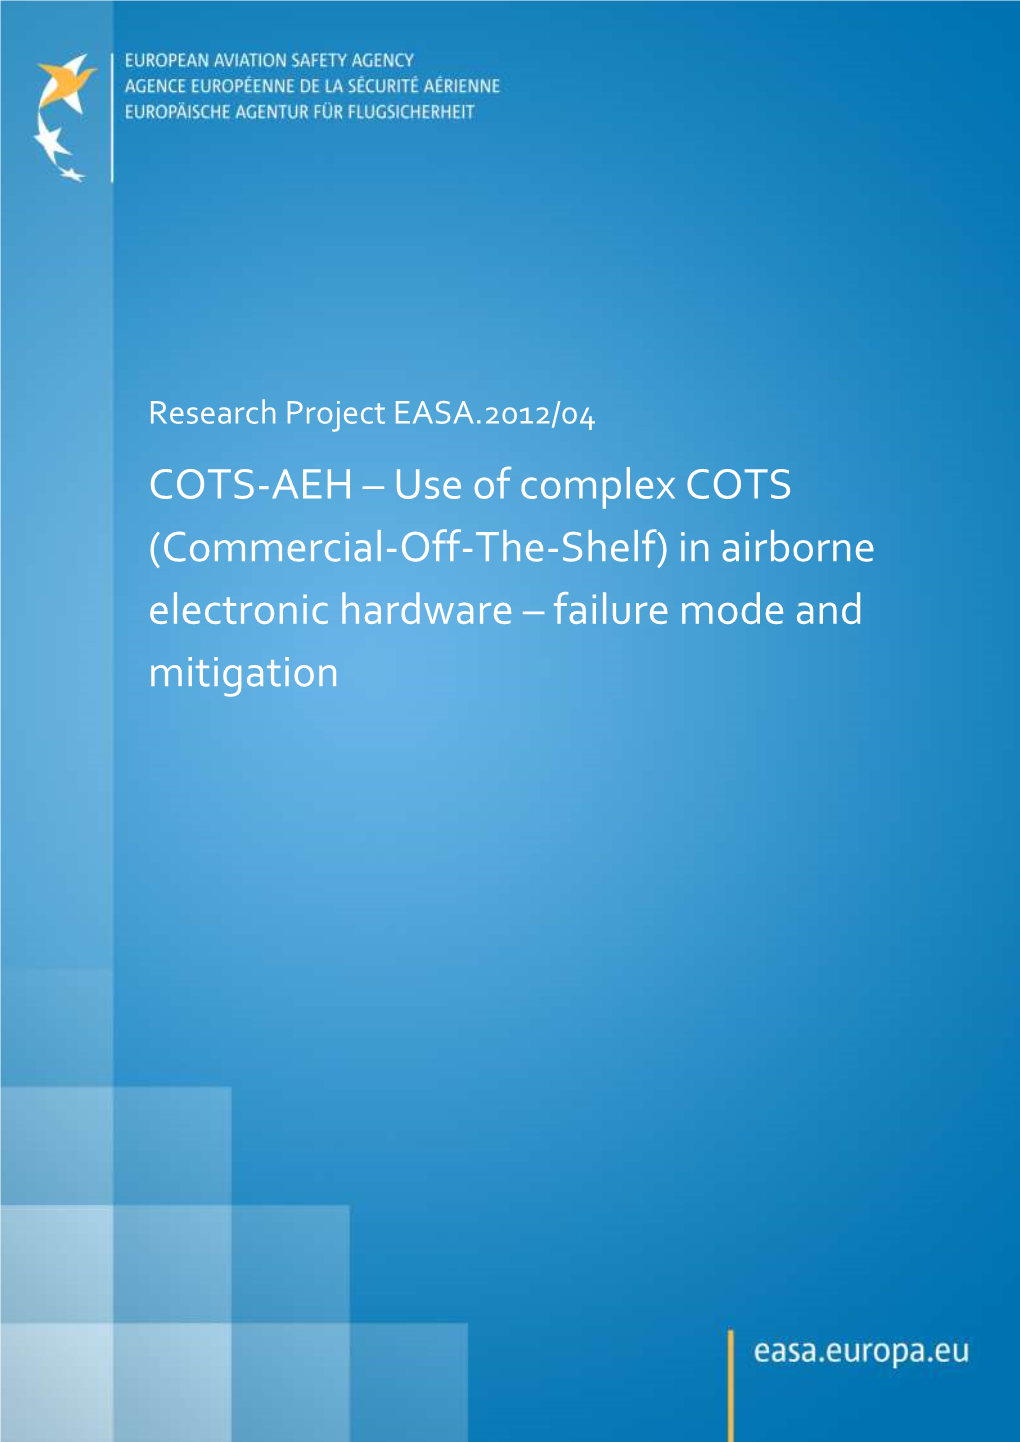 COTS-AEH – Use of Complex COTS (Commercial-Off-The-Shelf) in Airborne Electronic Hardware – Failure Mode and Mitigation